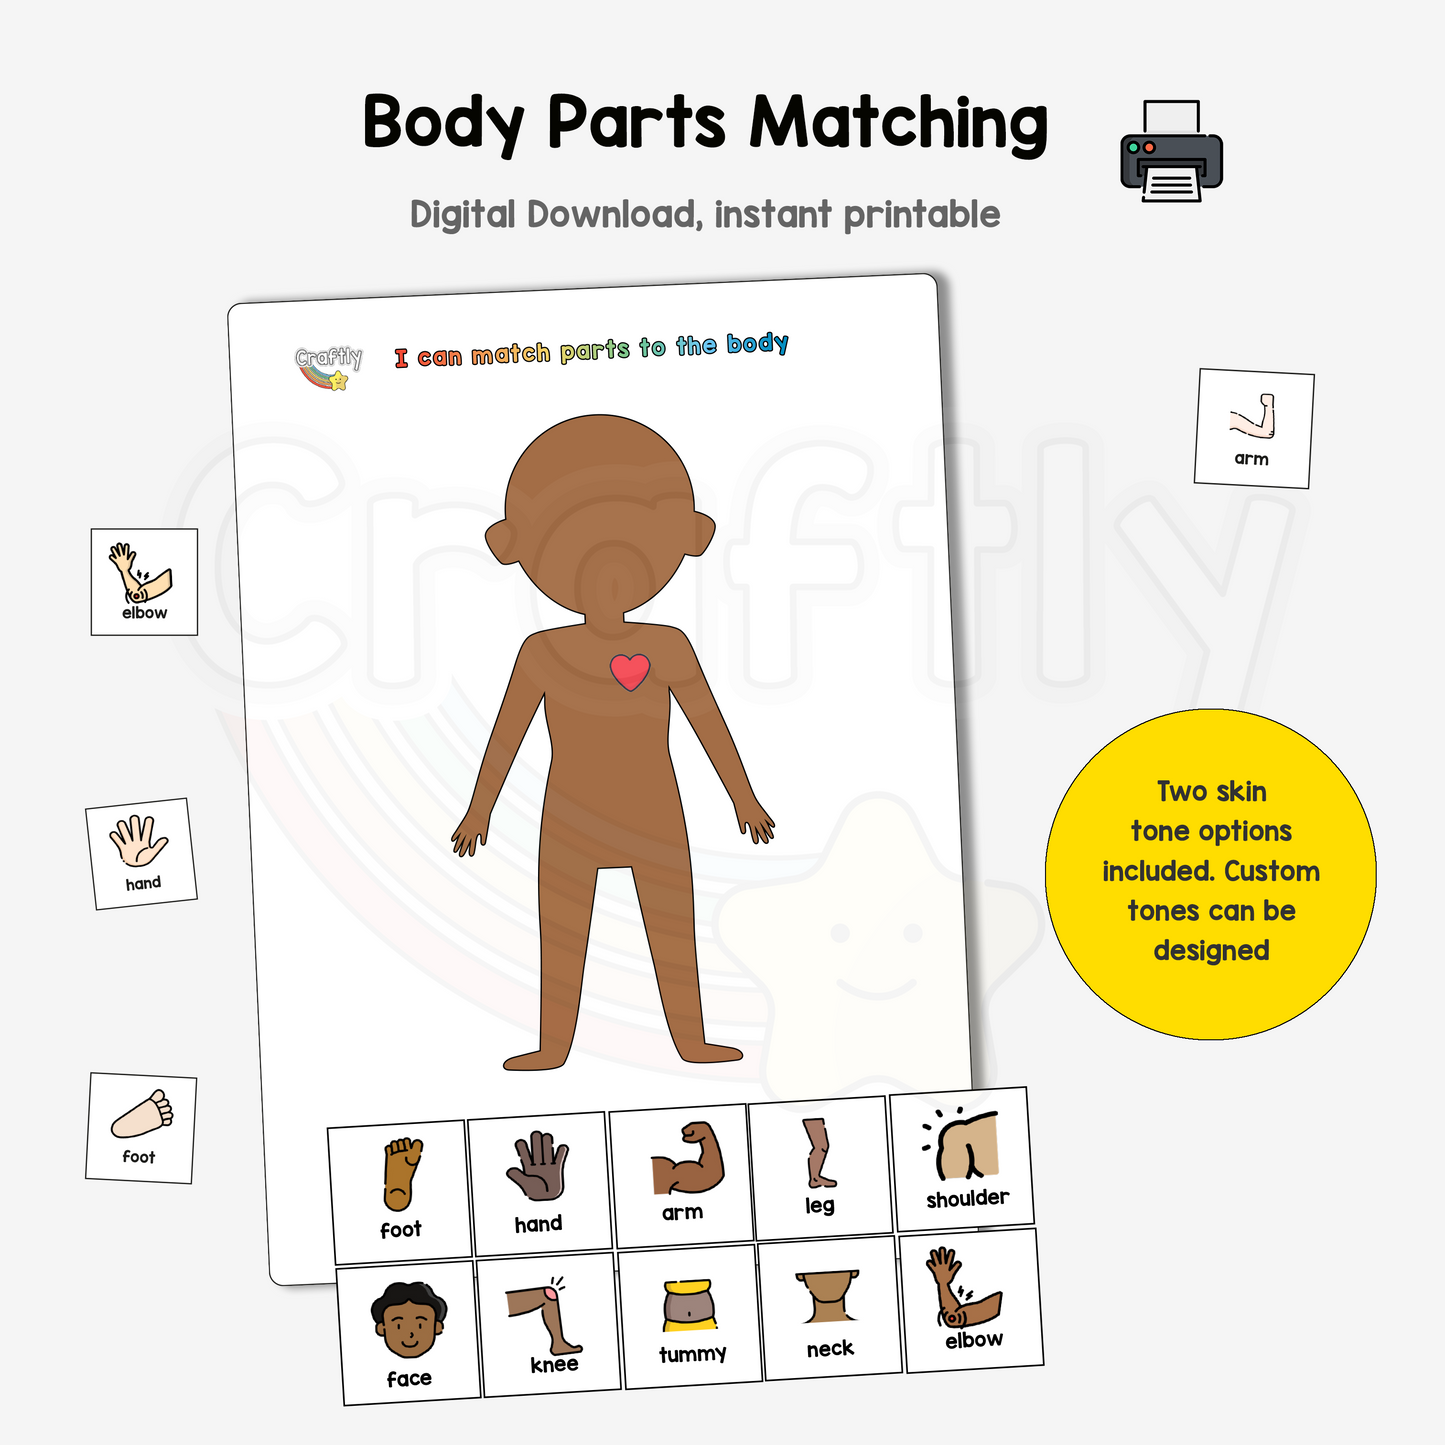 Body Parts Matching Activity